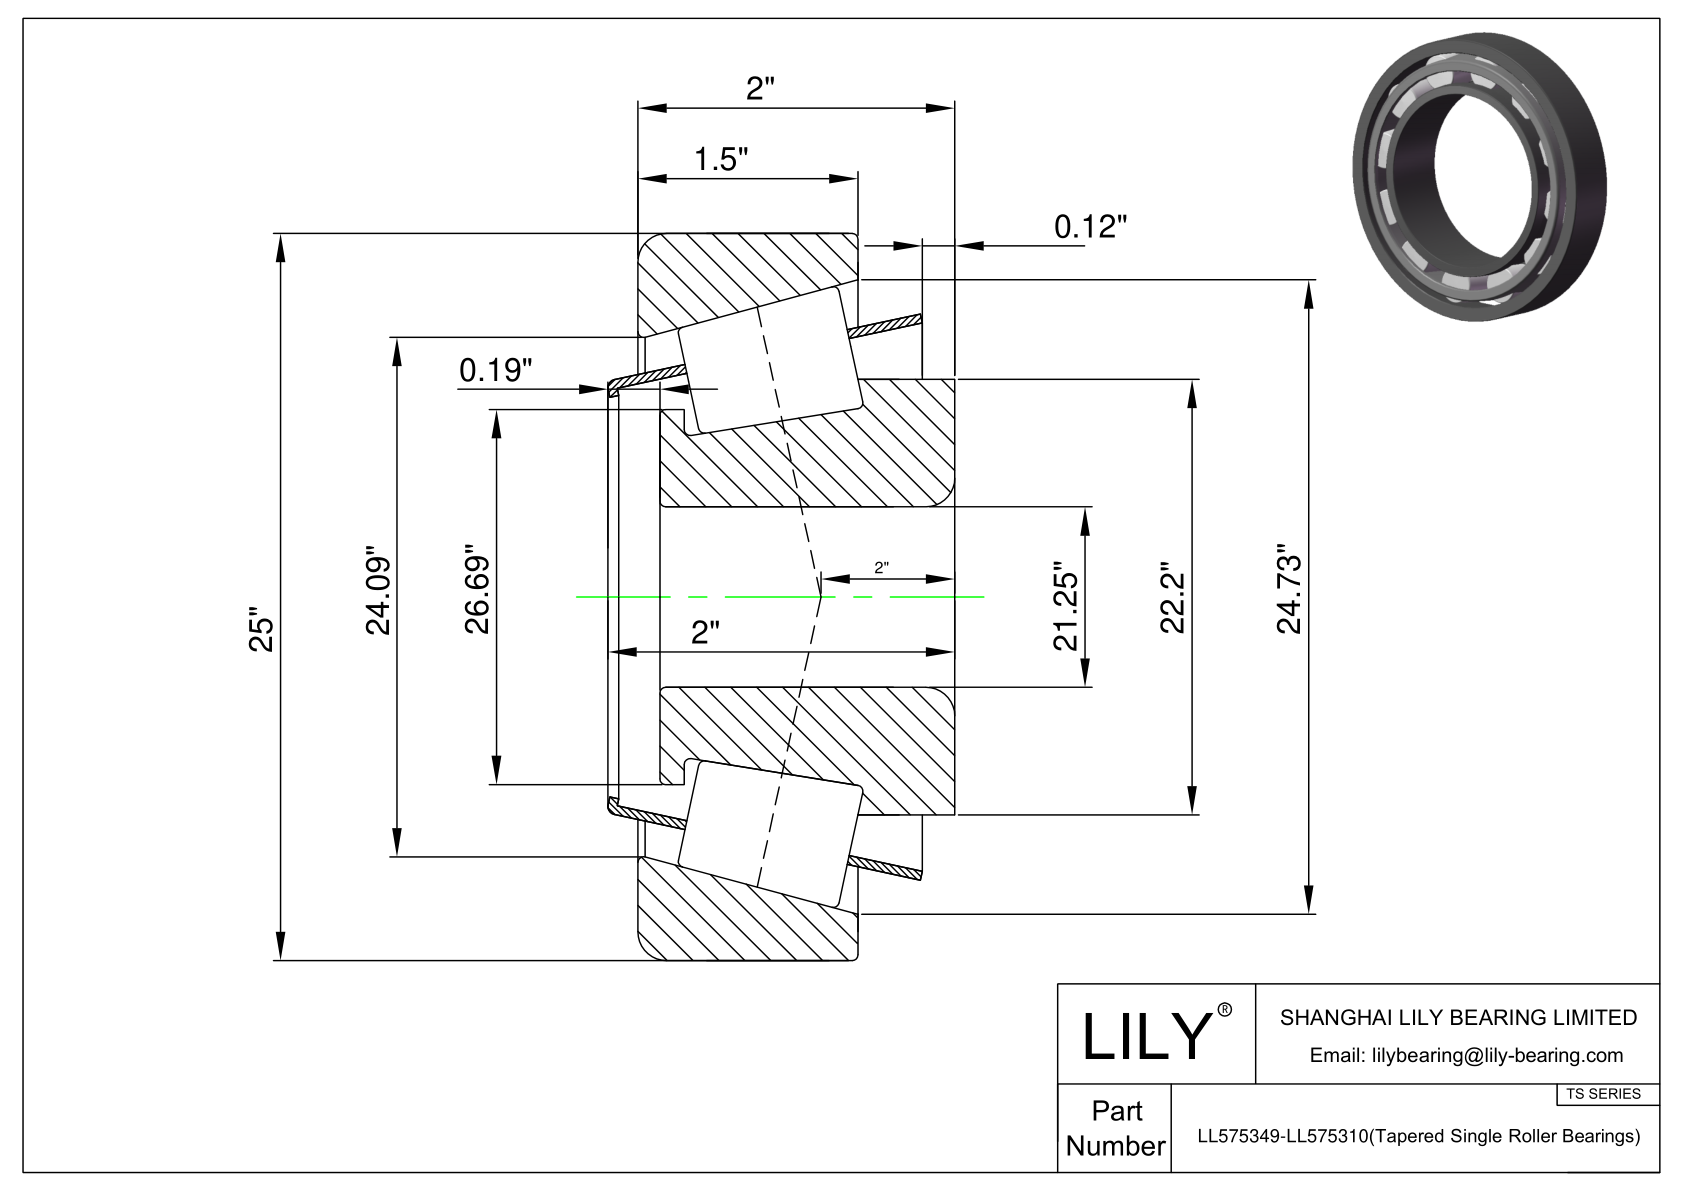 LL575349-LL575310 TS (Tapered Single Roller Bearings) (Imperial) cad drawing